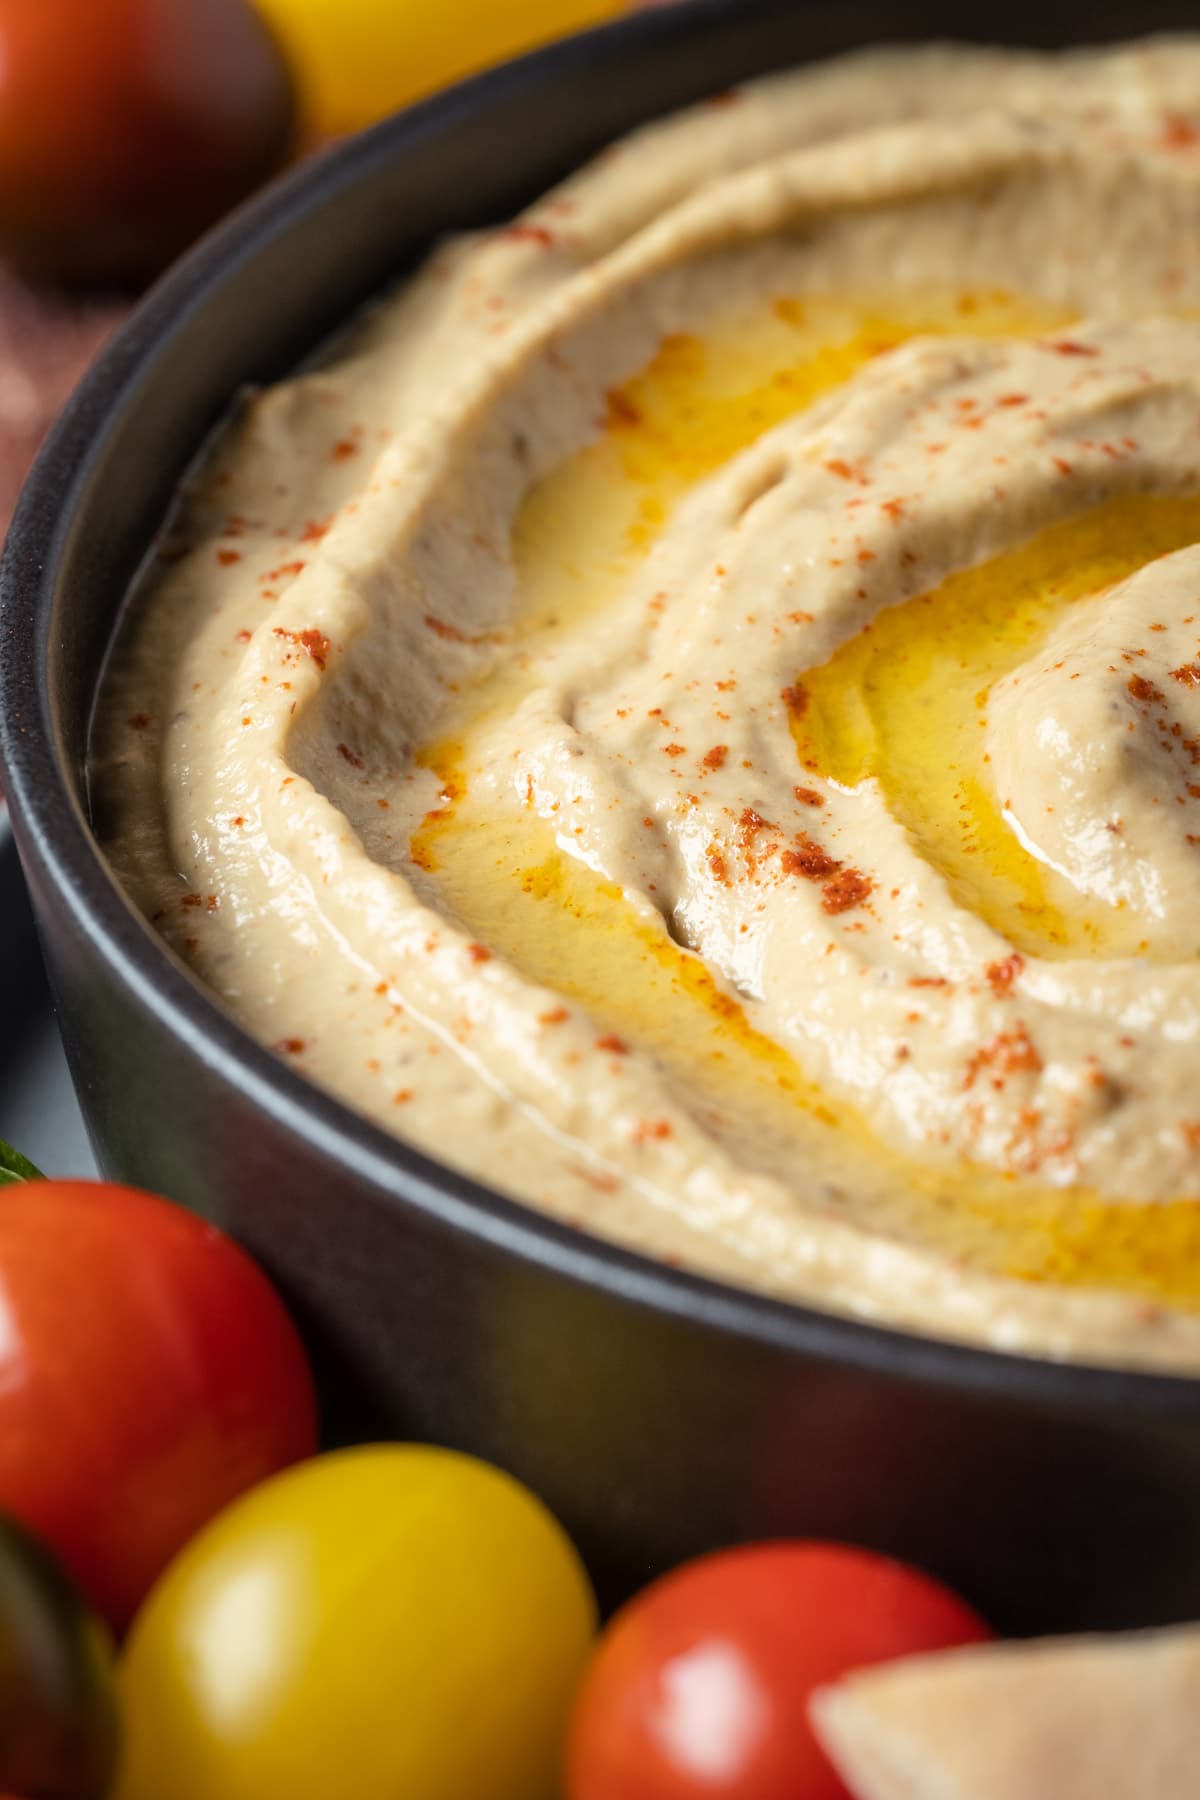 Baba ganoush in a bowl topped with smoked paprika and olive oil, with cherry tomatoes and pita breads on the side.